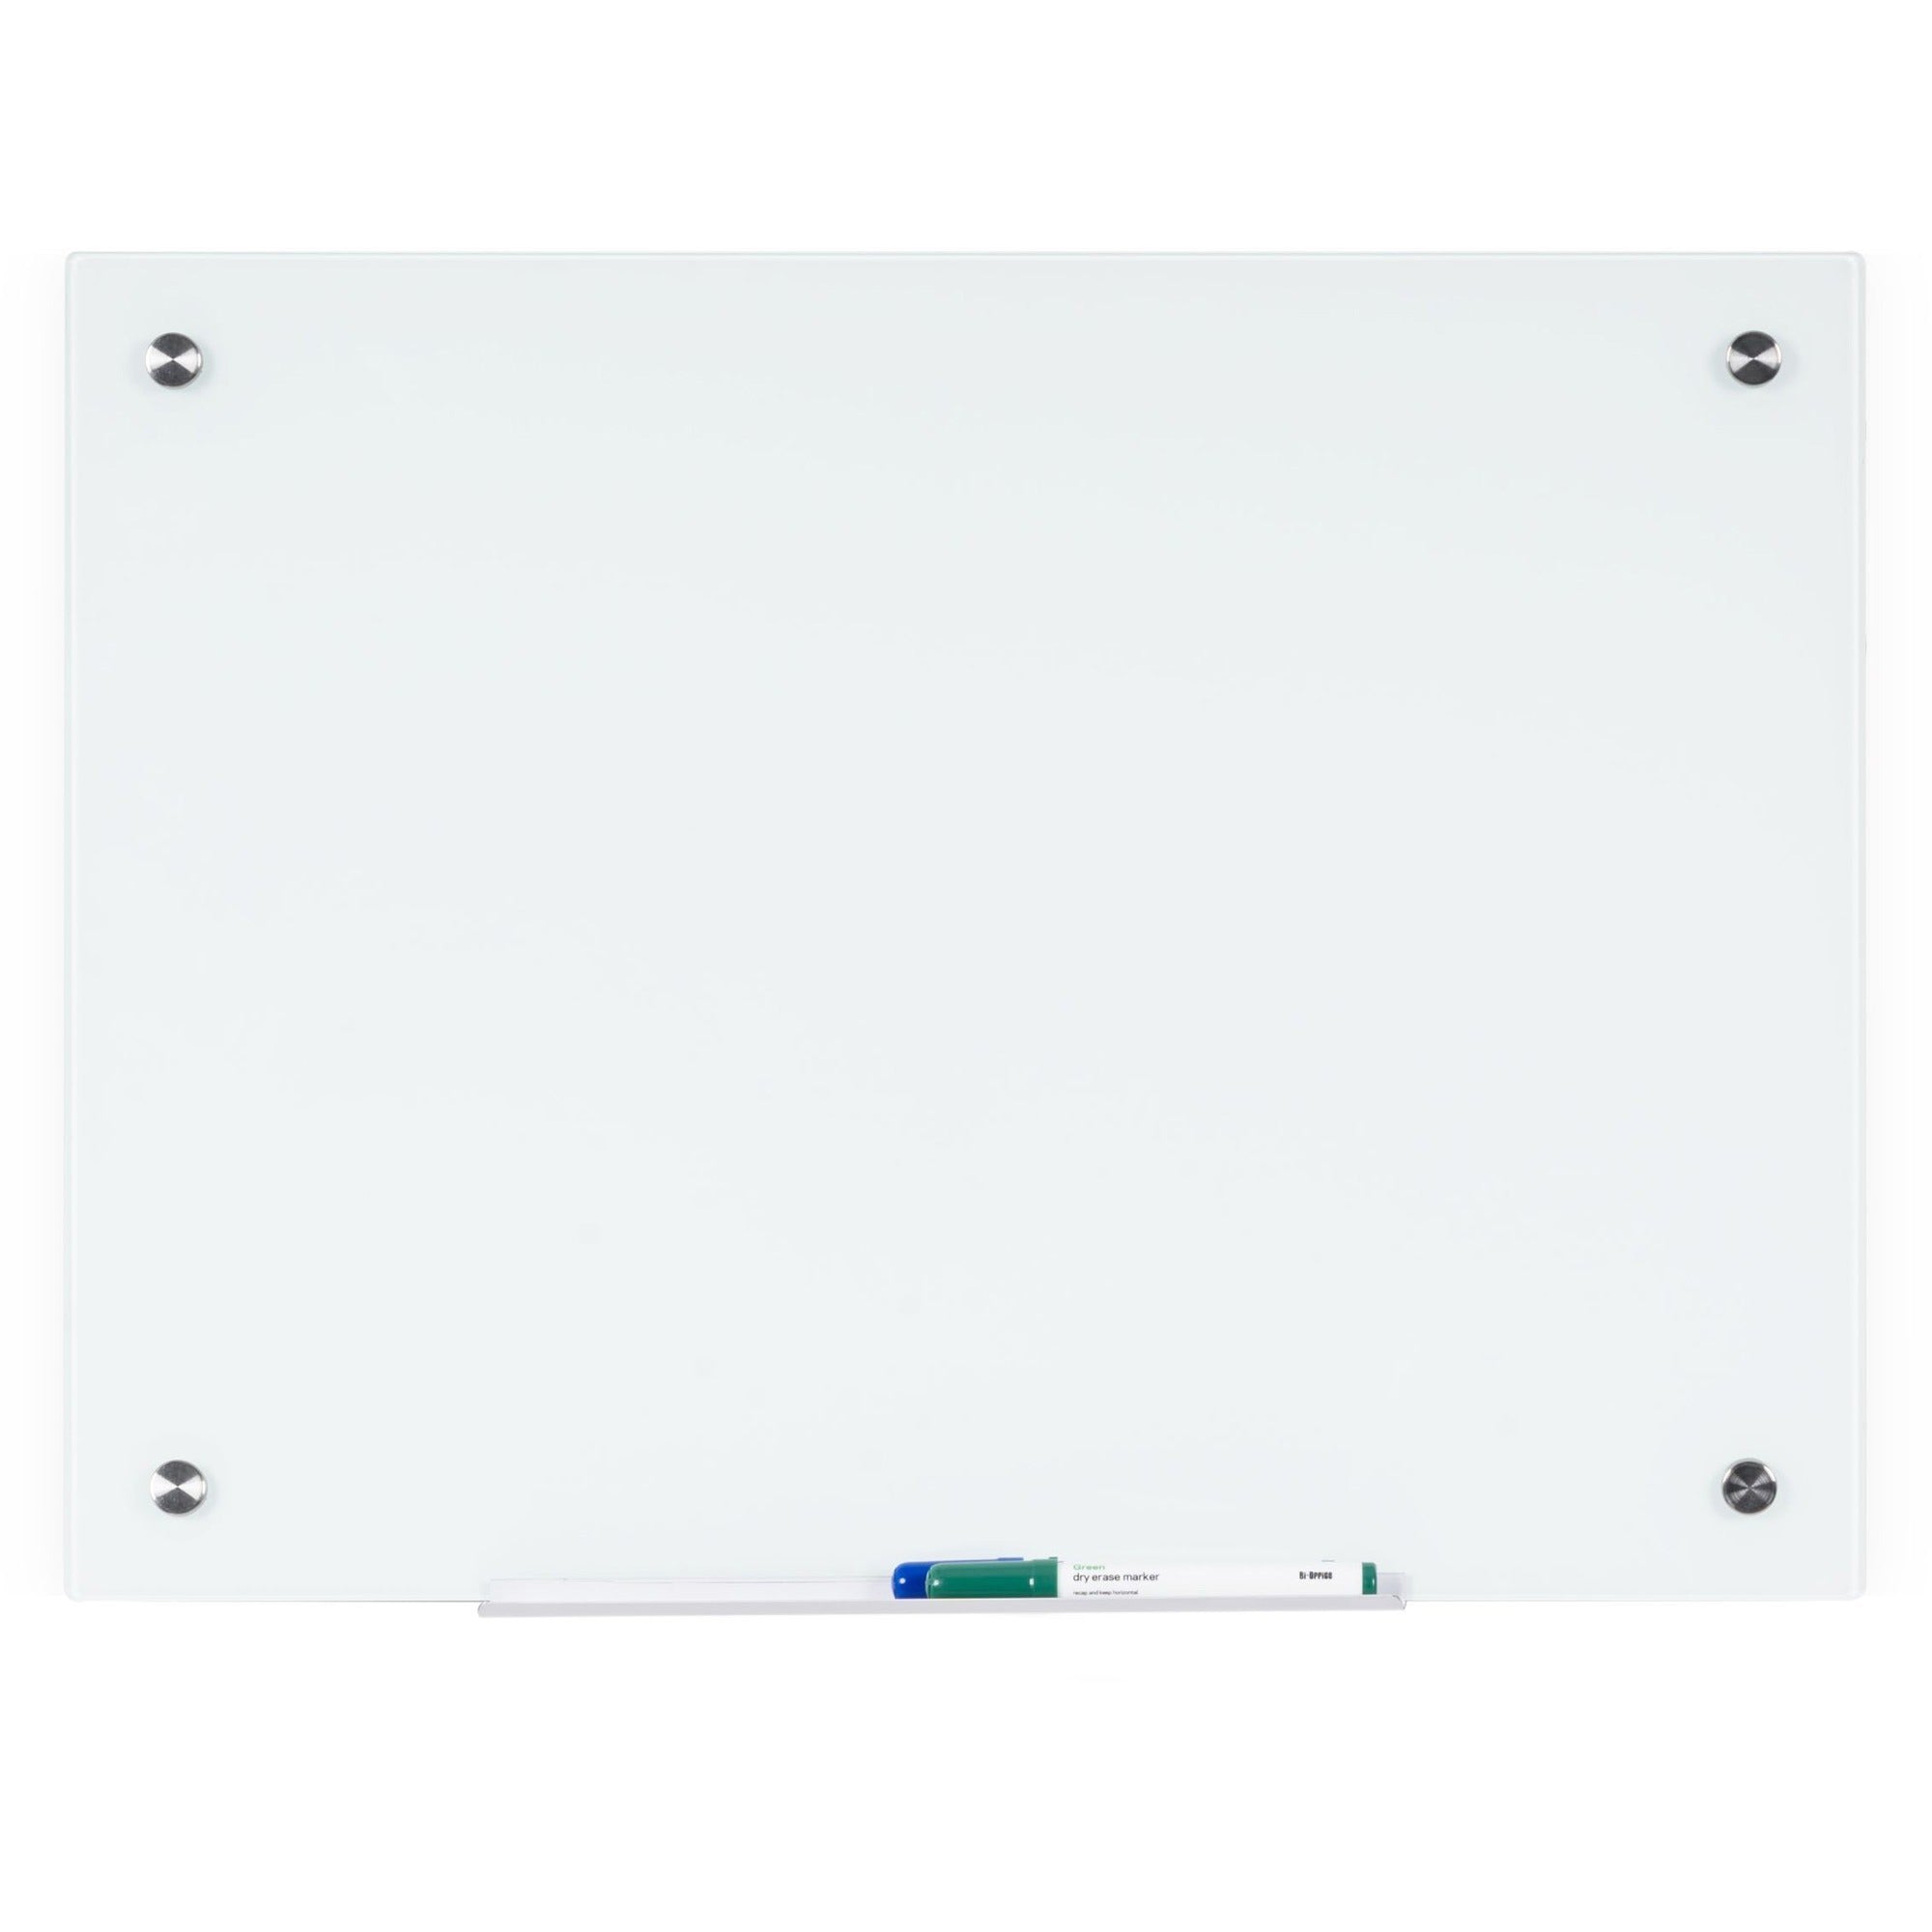 bi-silque-magnetic-glass-dry-erase-board-18-15-ft-width-x-24-2-ft-height-white-glass-surface-rectangle-horizontal-vertical-magnetic-1-each_bvcgl040107 - 1